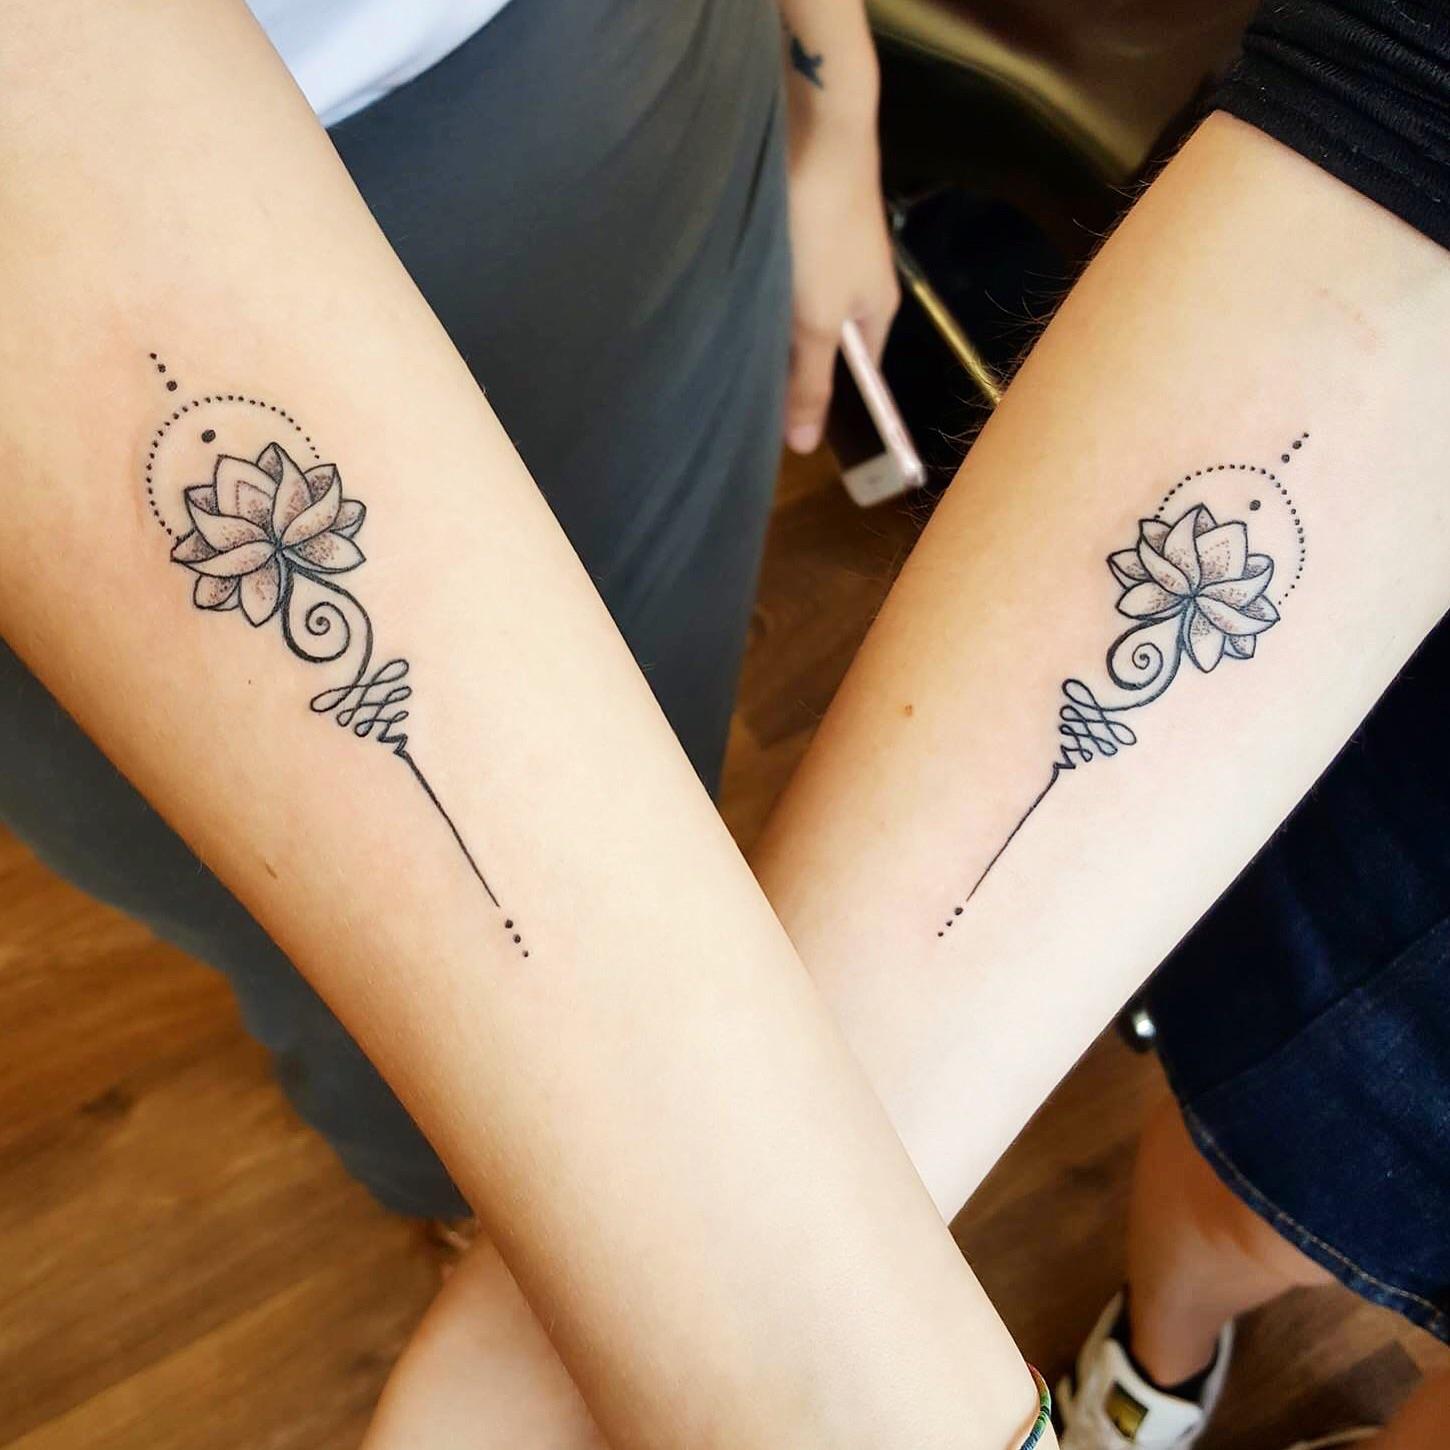 Sisters Tattoo Meaning: The Intricate Meanings Behind Popular Tattoo Styles and Symbols